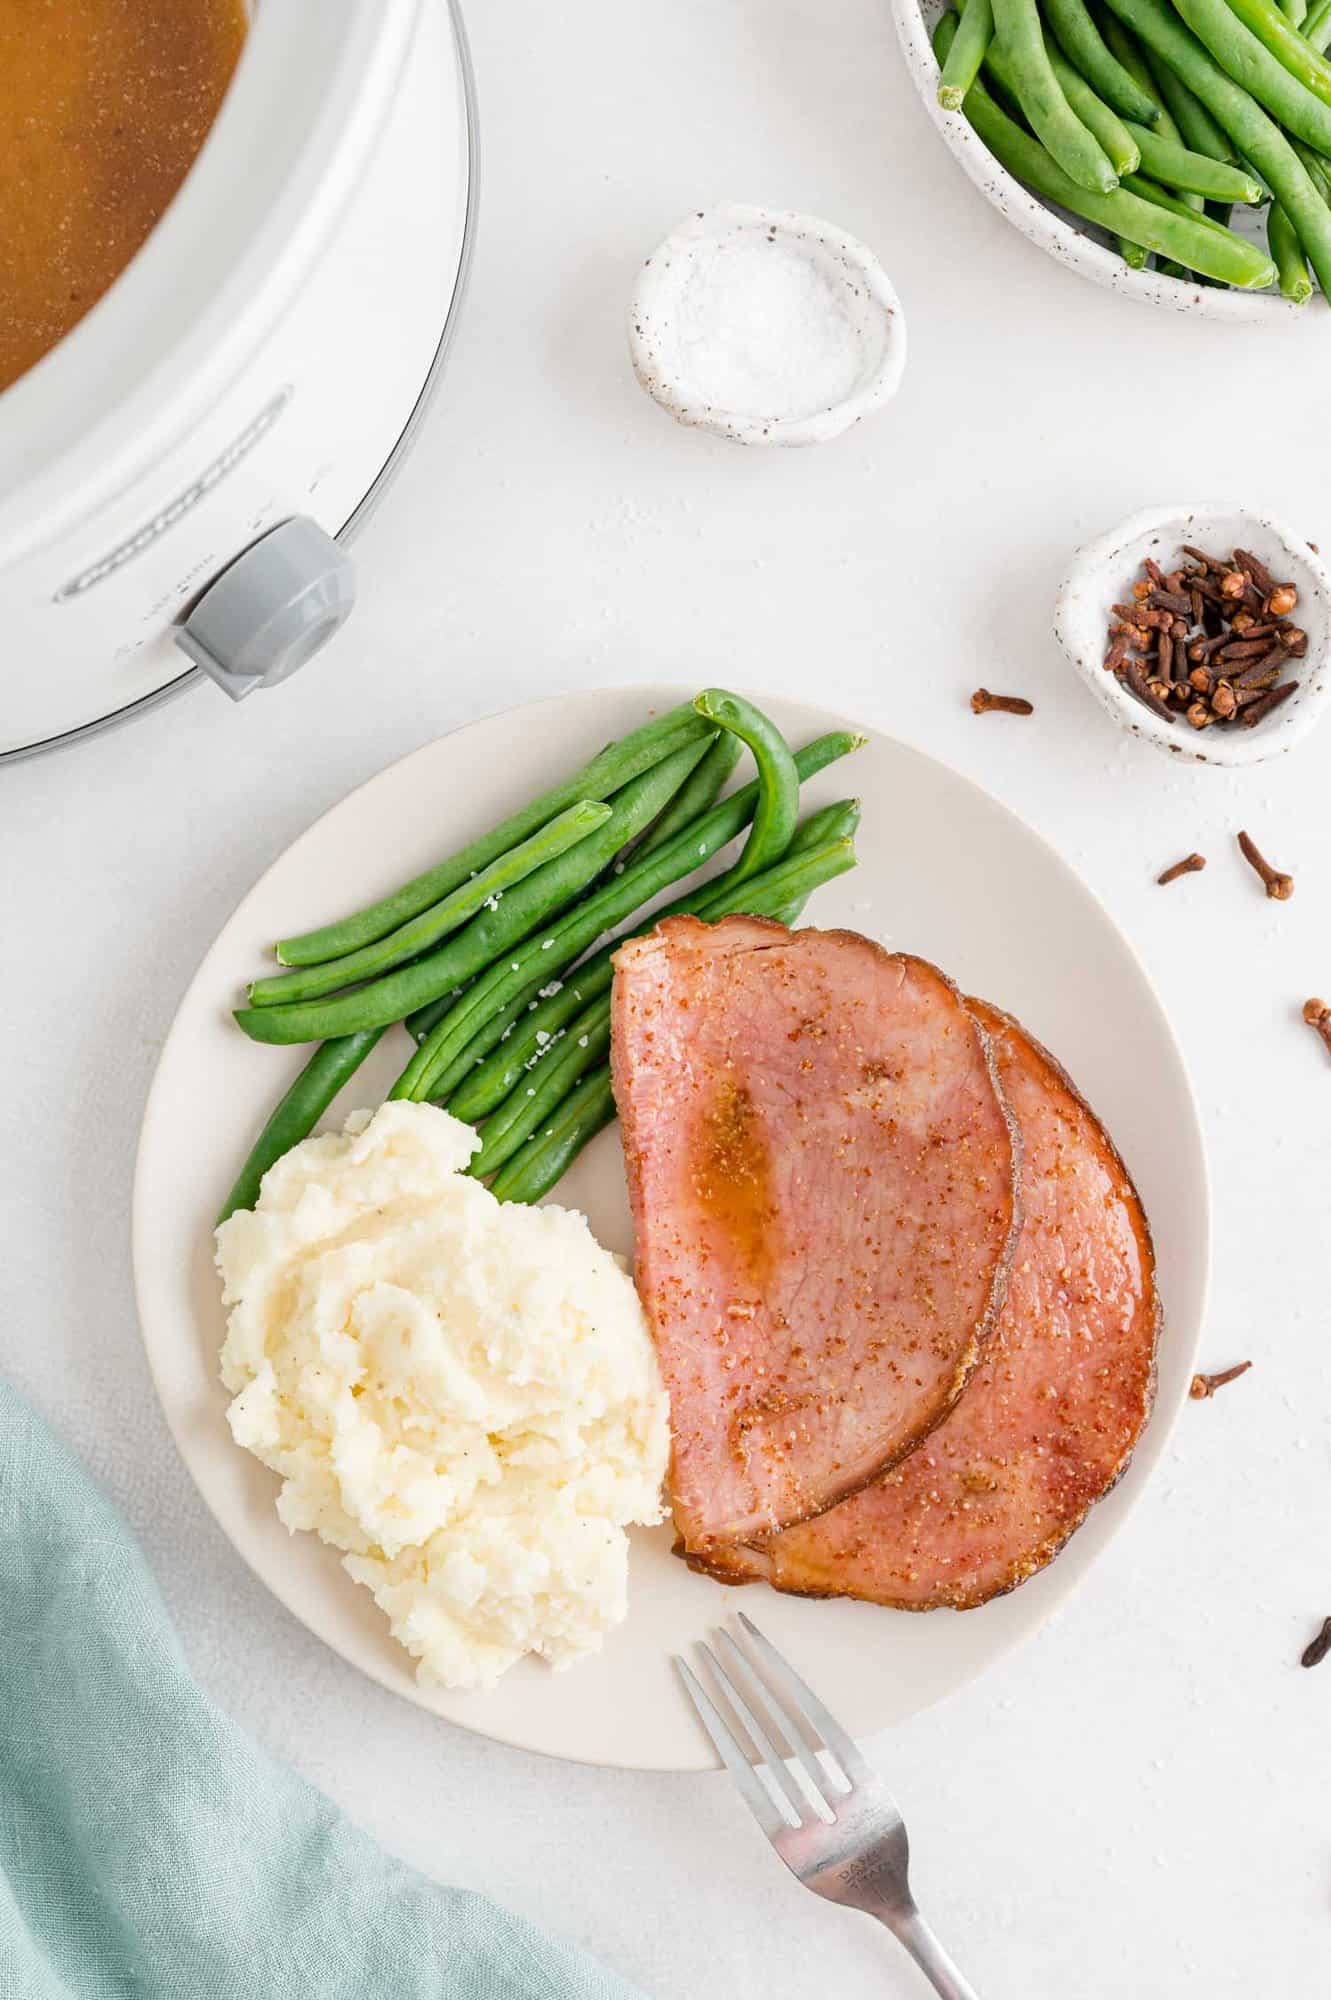 Crockpot ham on a plate with mashed potatoes and green beans.